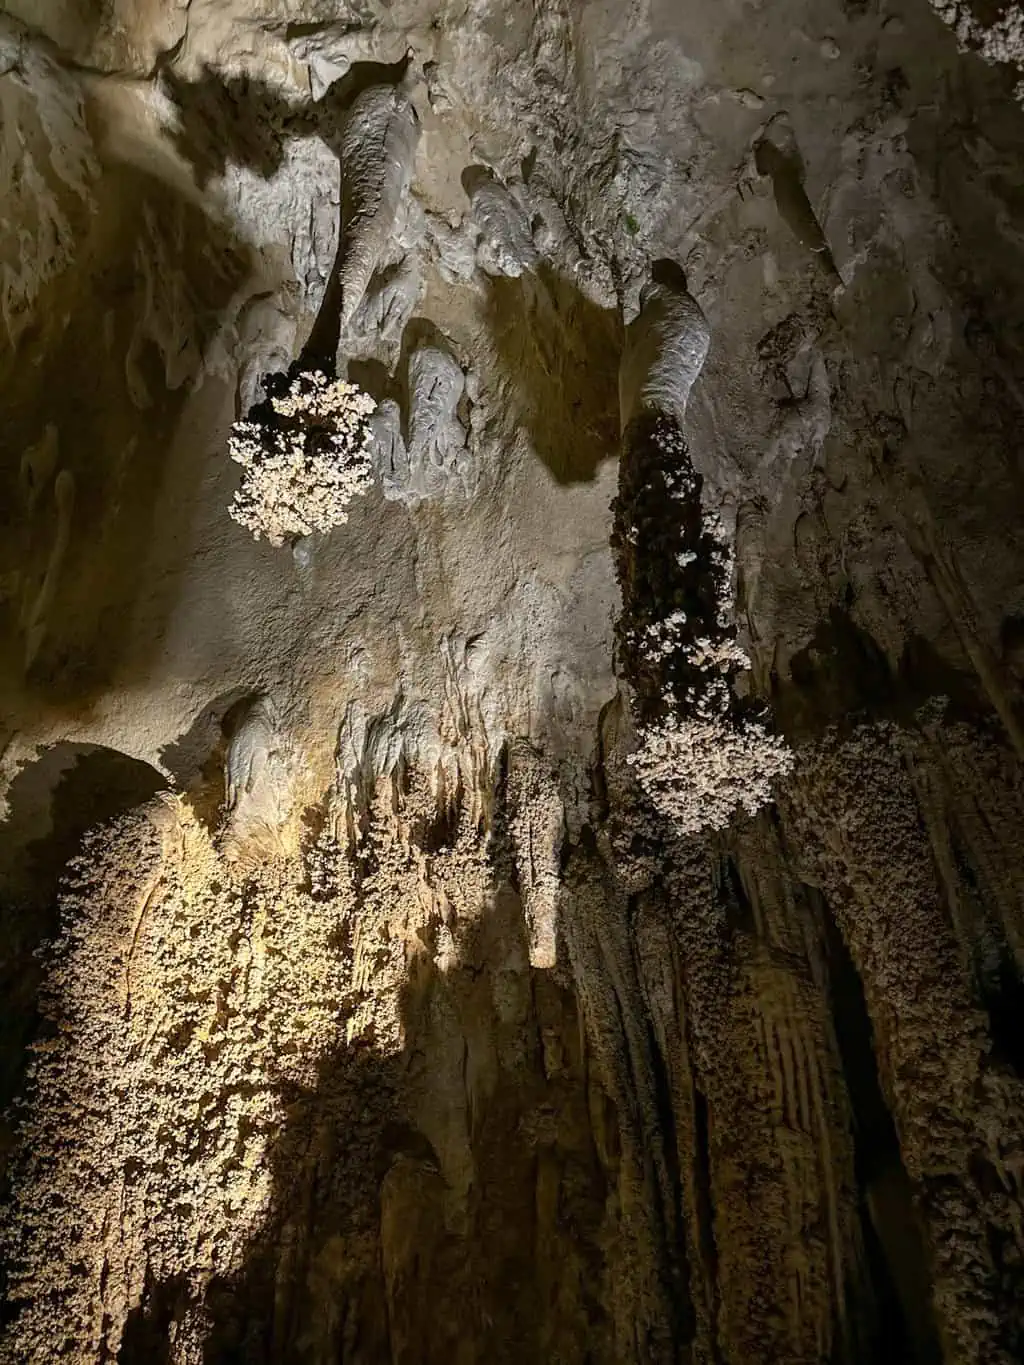 Things to see in Carlsbad Caverns